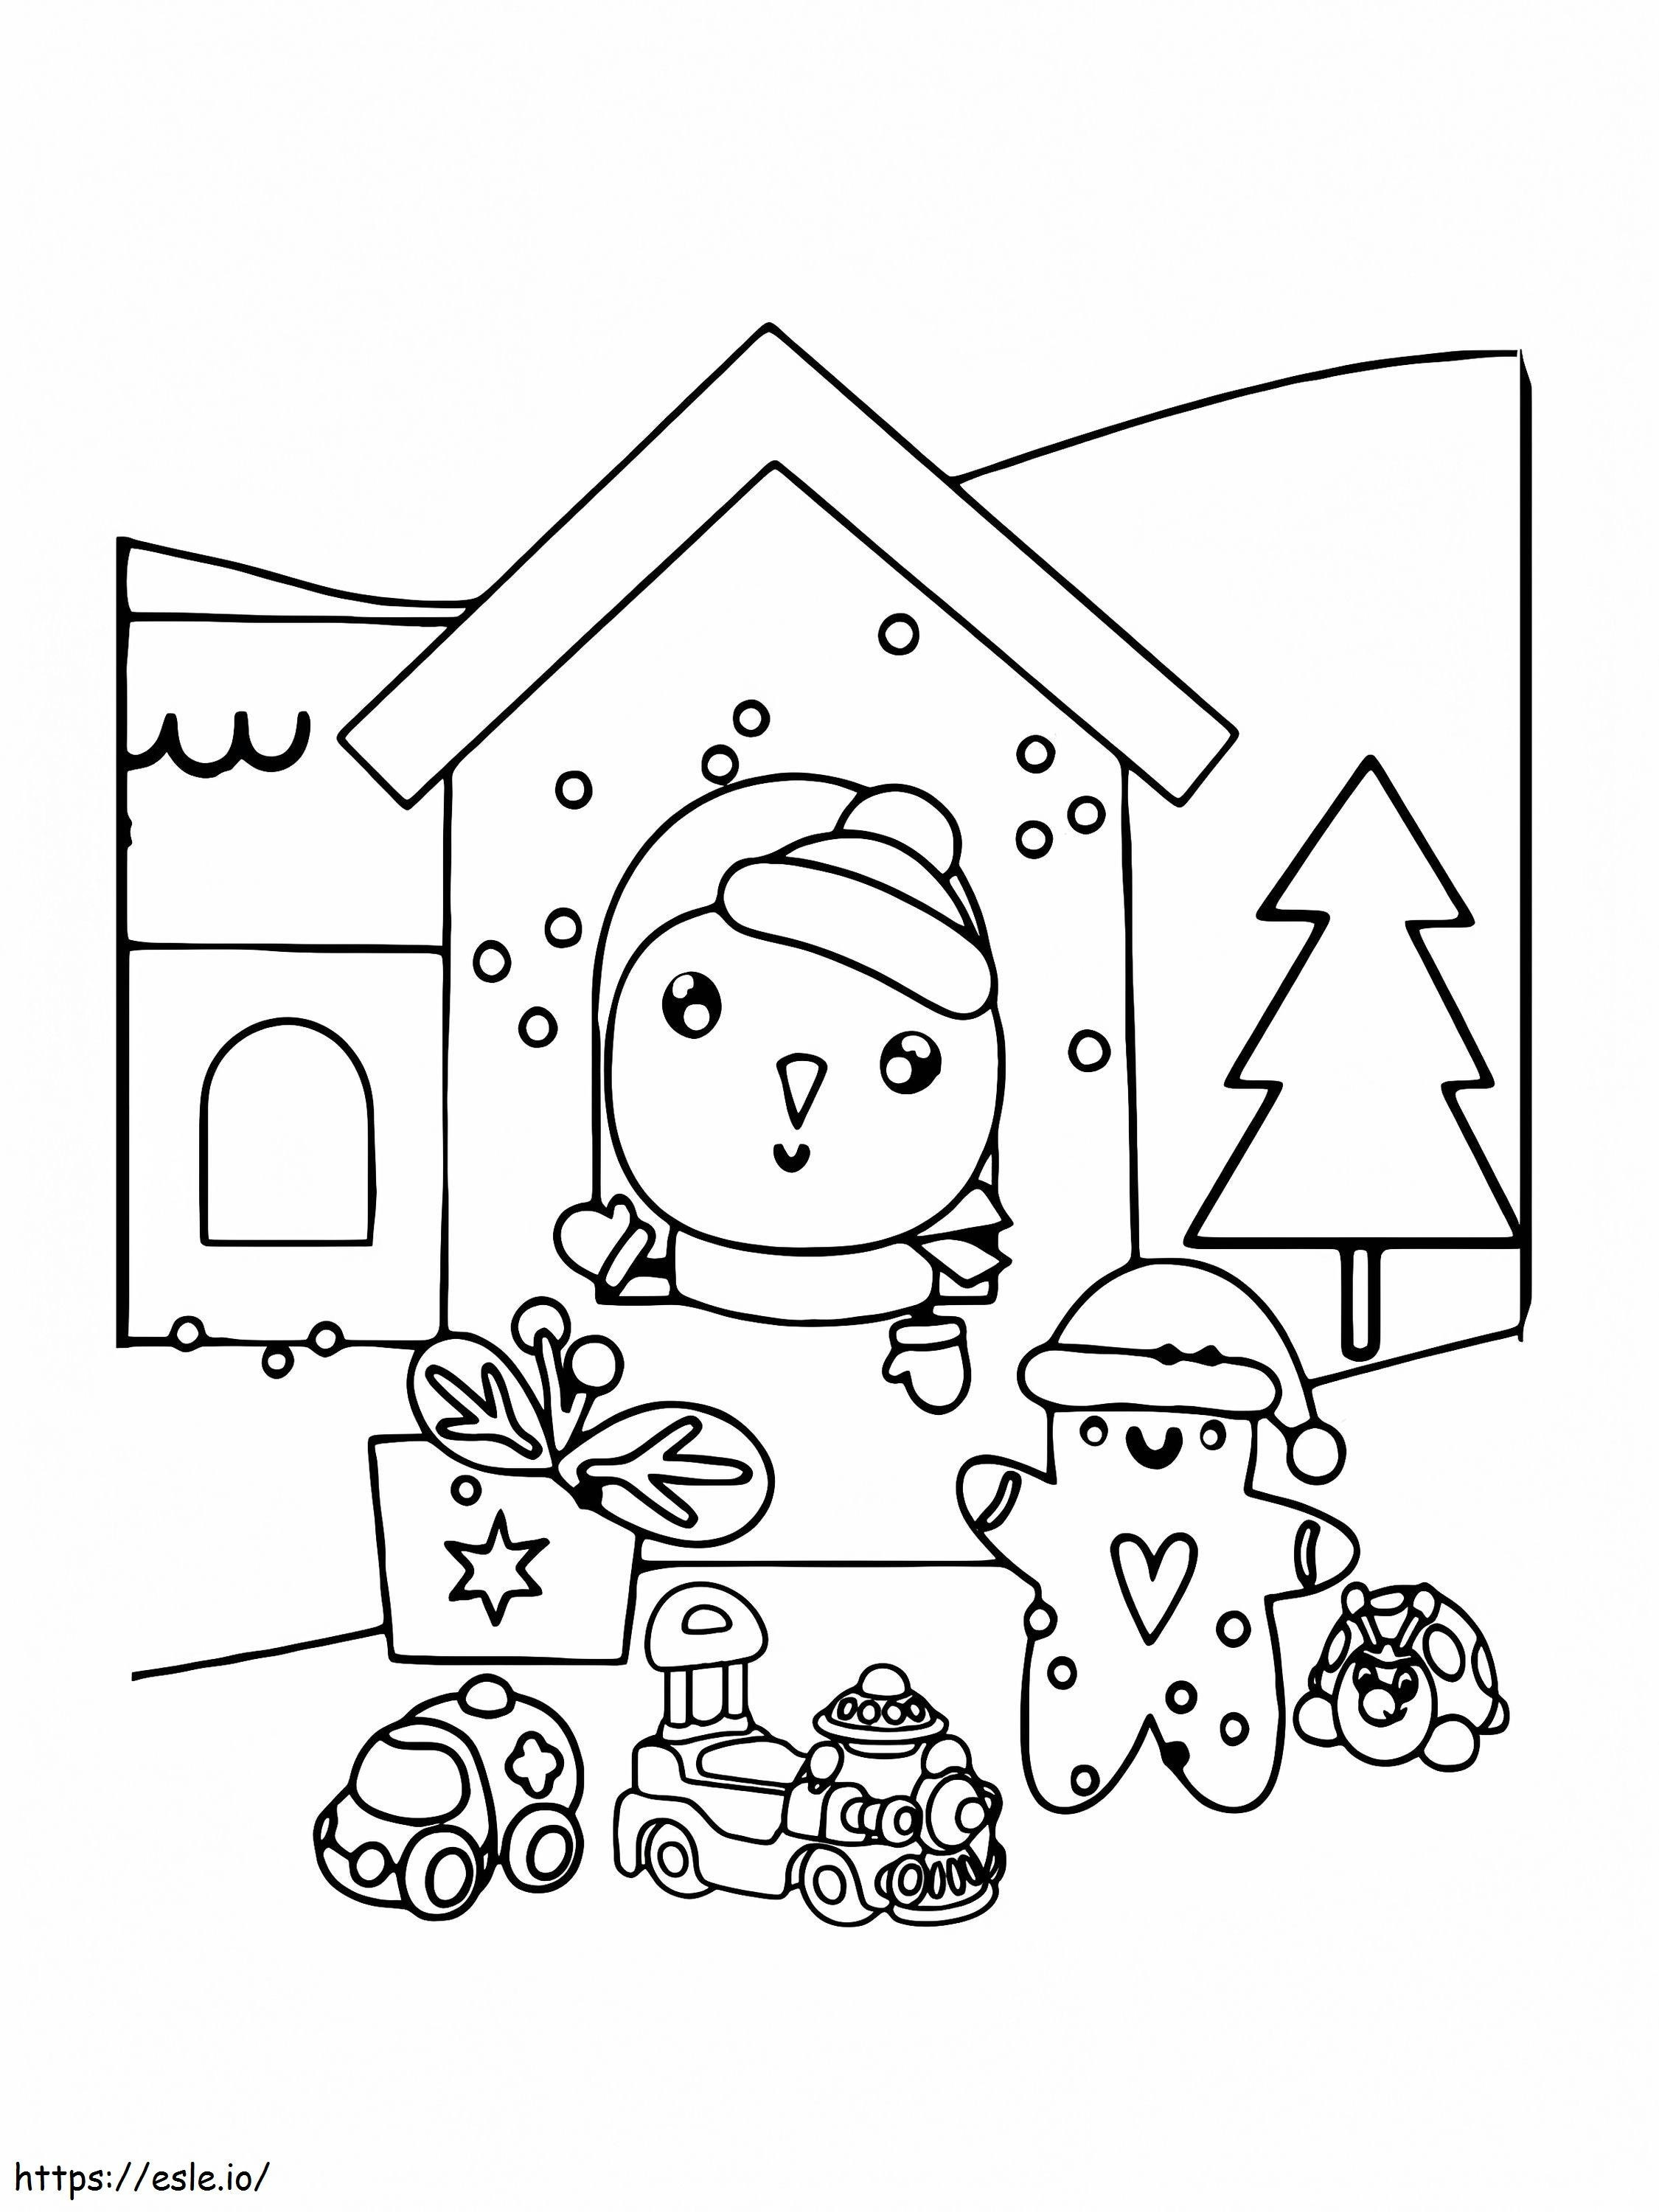 Jovial Snowman coloring page